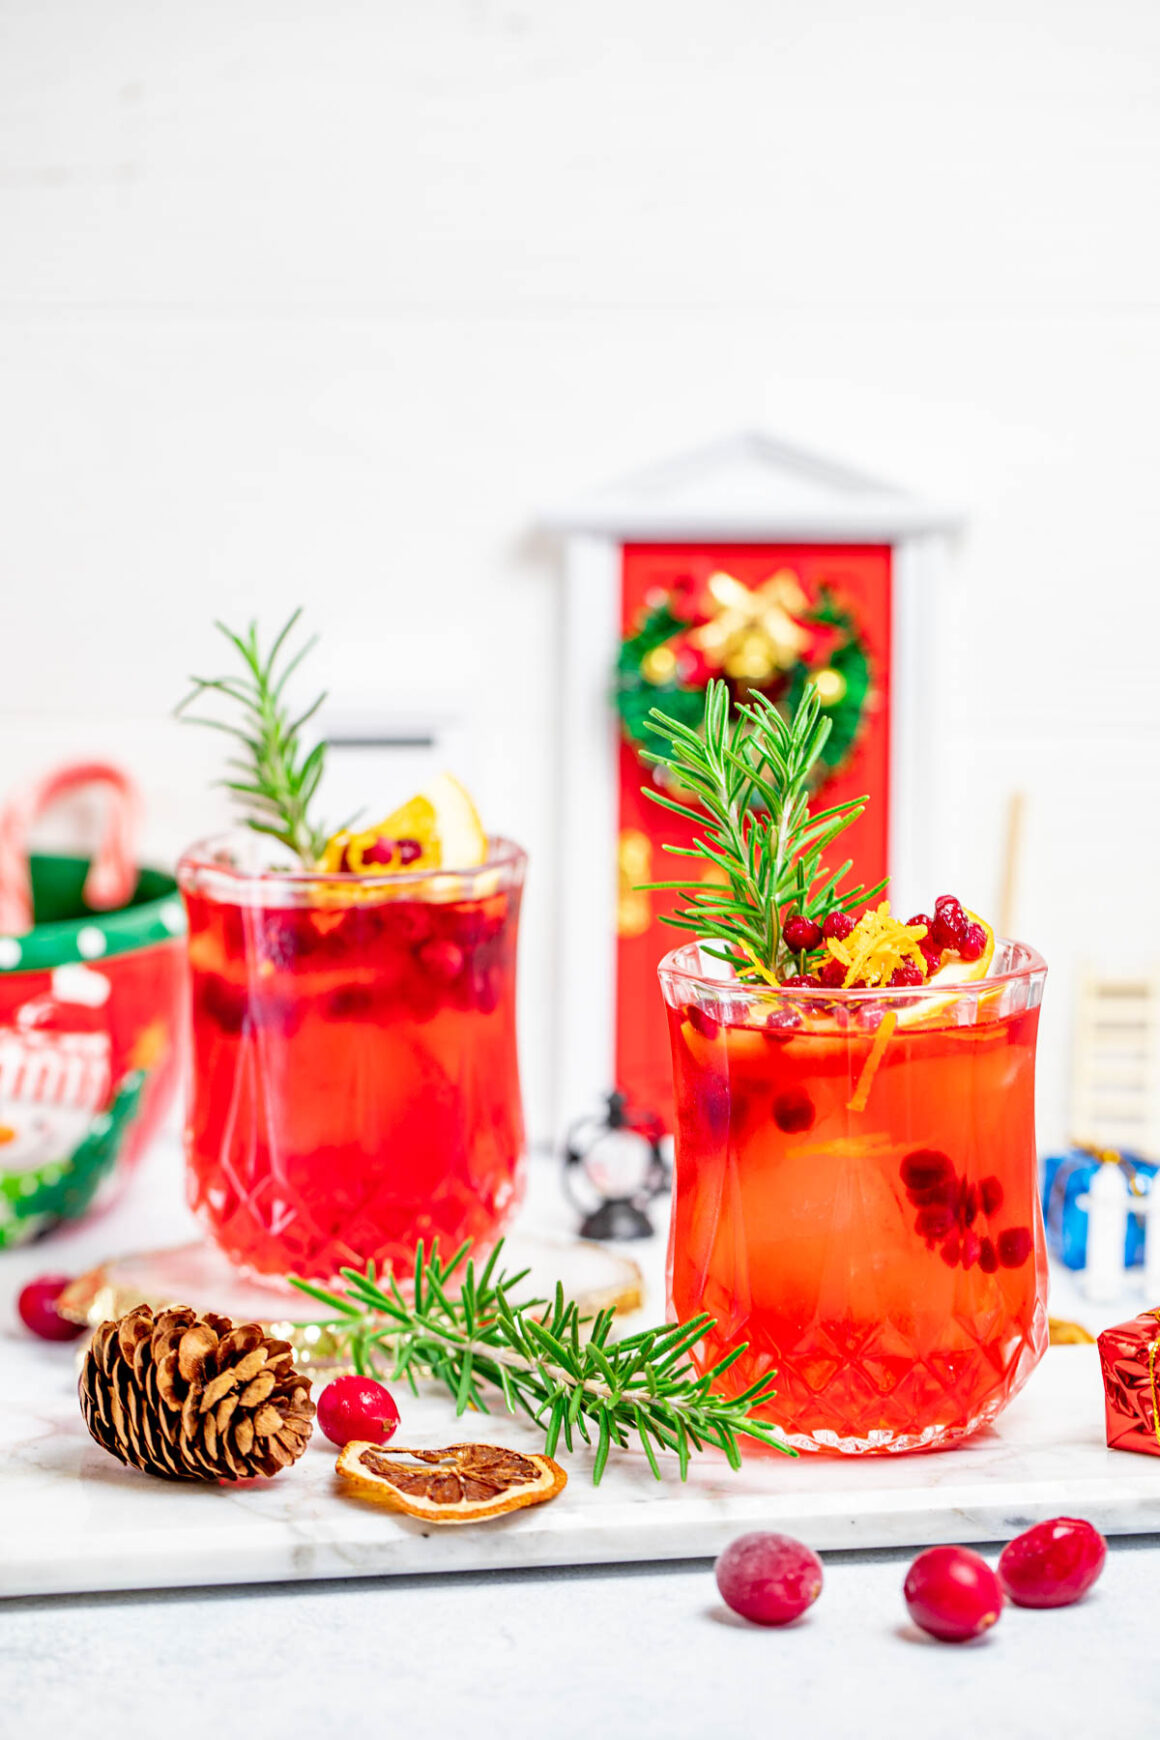 The pomegranate Gin Cocktail is the perfect choice for your holiday gathering, combining the vibrant flavors of pomegranate.